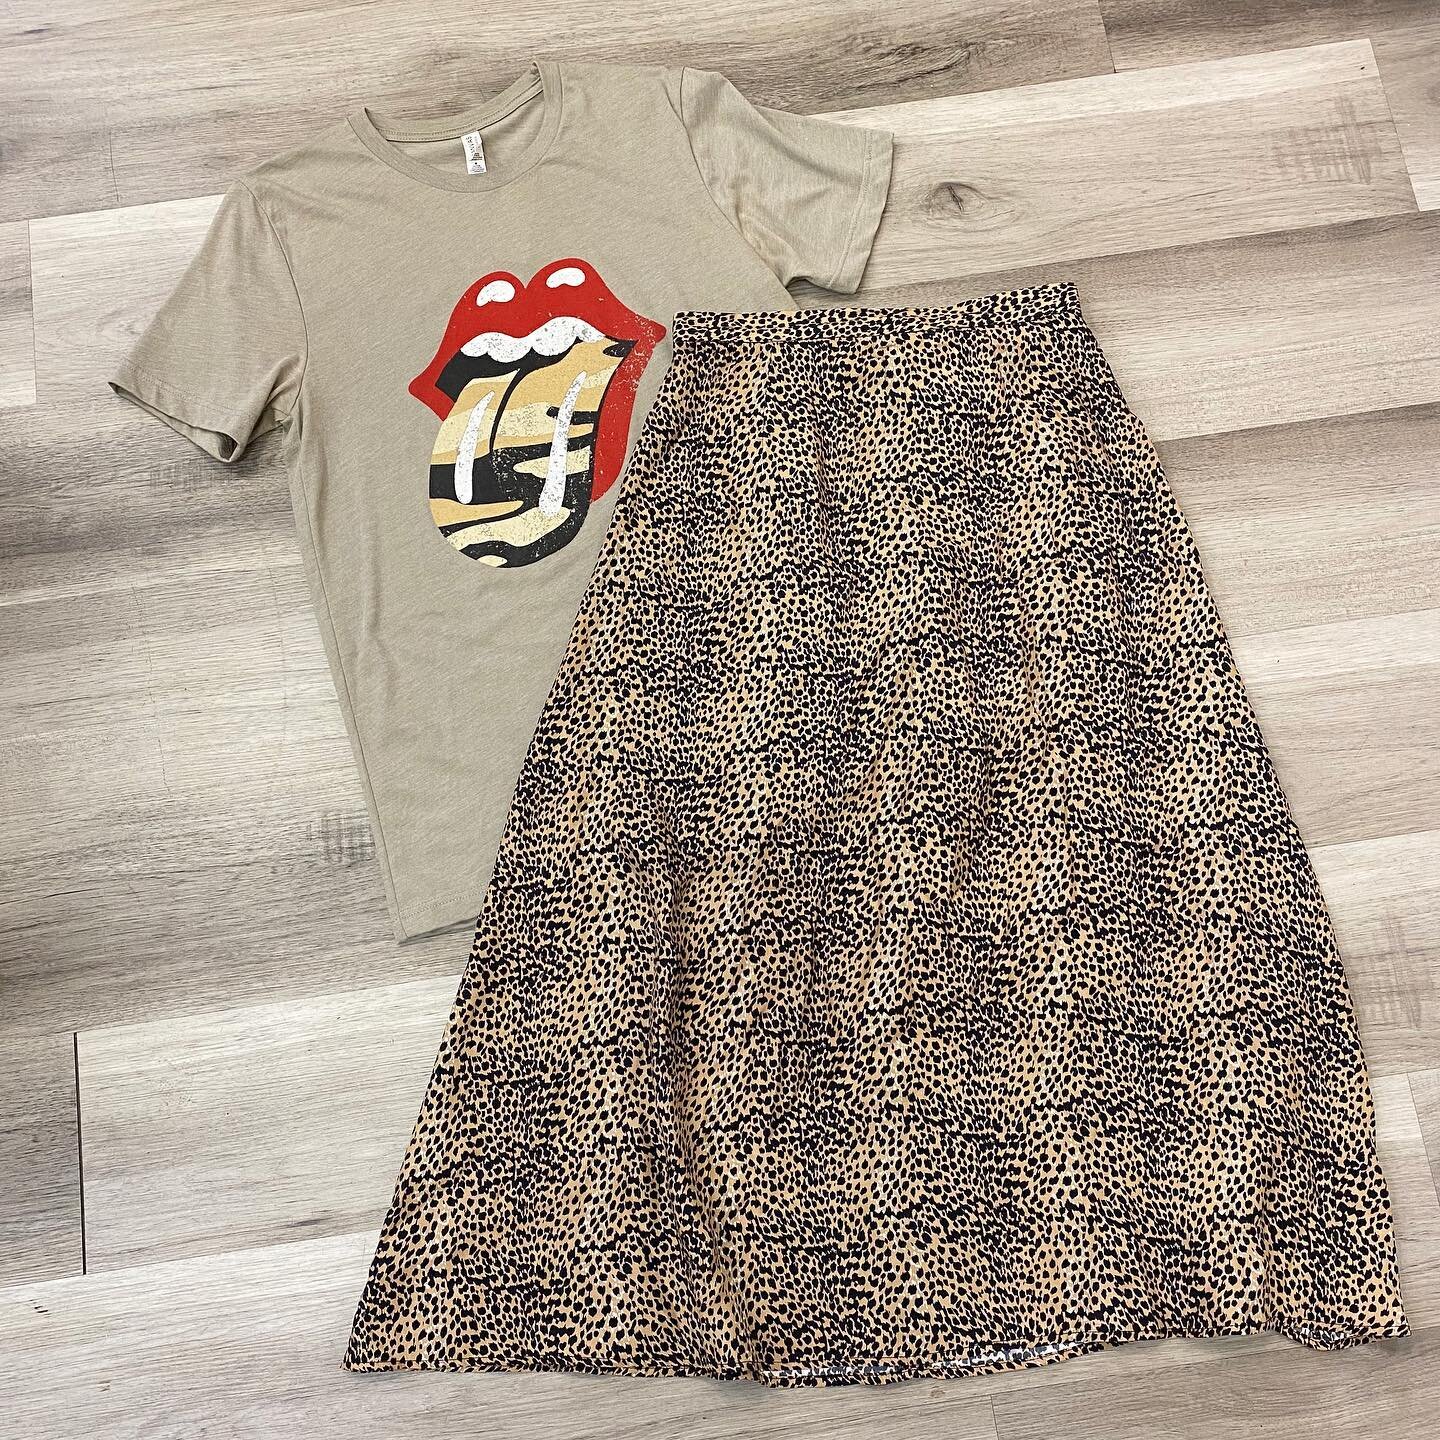 Top- #canvas Size: M $24.99

Skirt- #emersonfry Size: M $79.99

Don&rsquo;t forget we ship and offer curbside pickup! ♻️ Call 📞 703-836-6468 to buy today! ✅ Authenticity is guaranteed with a money back promise ✅ *Consign ALX LLC is not affiliated wi